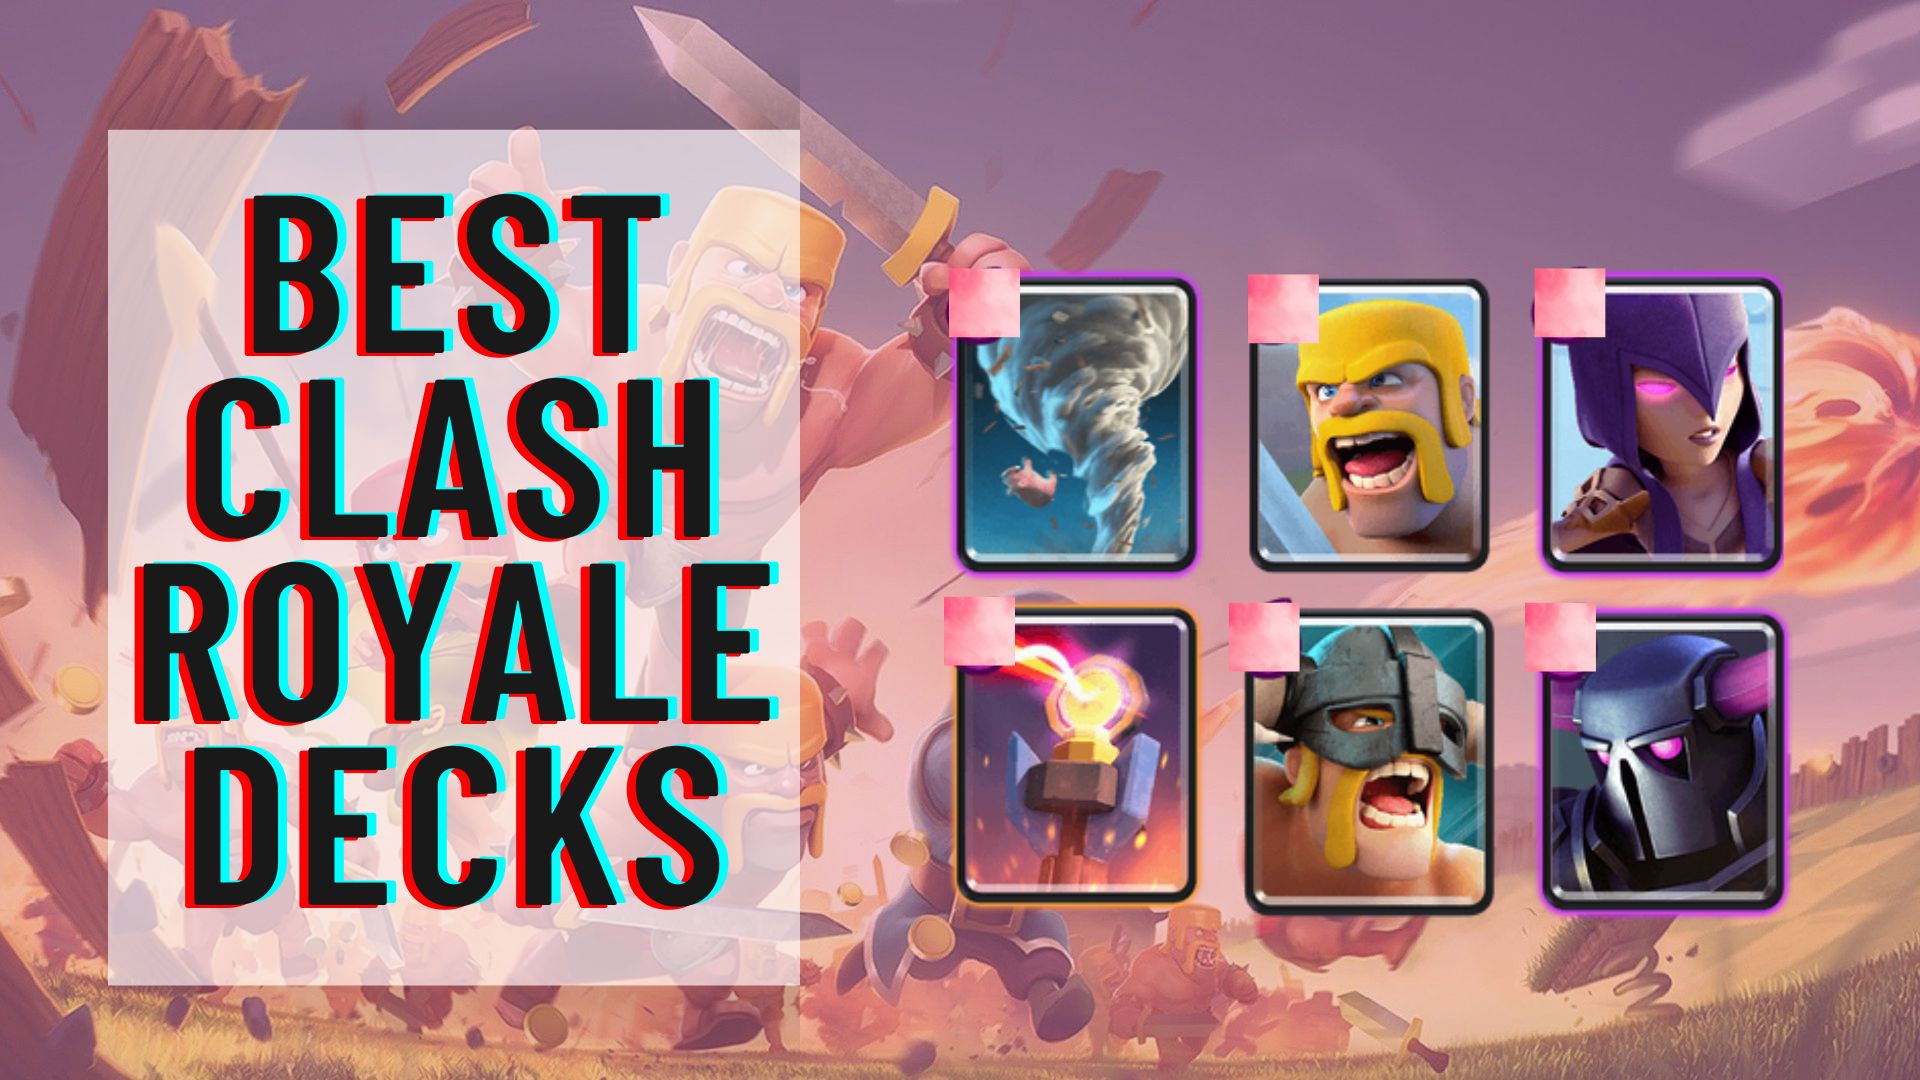 stats royale top cards